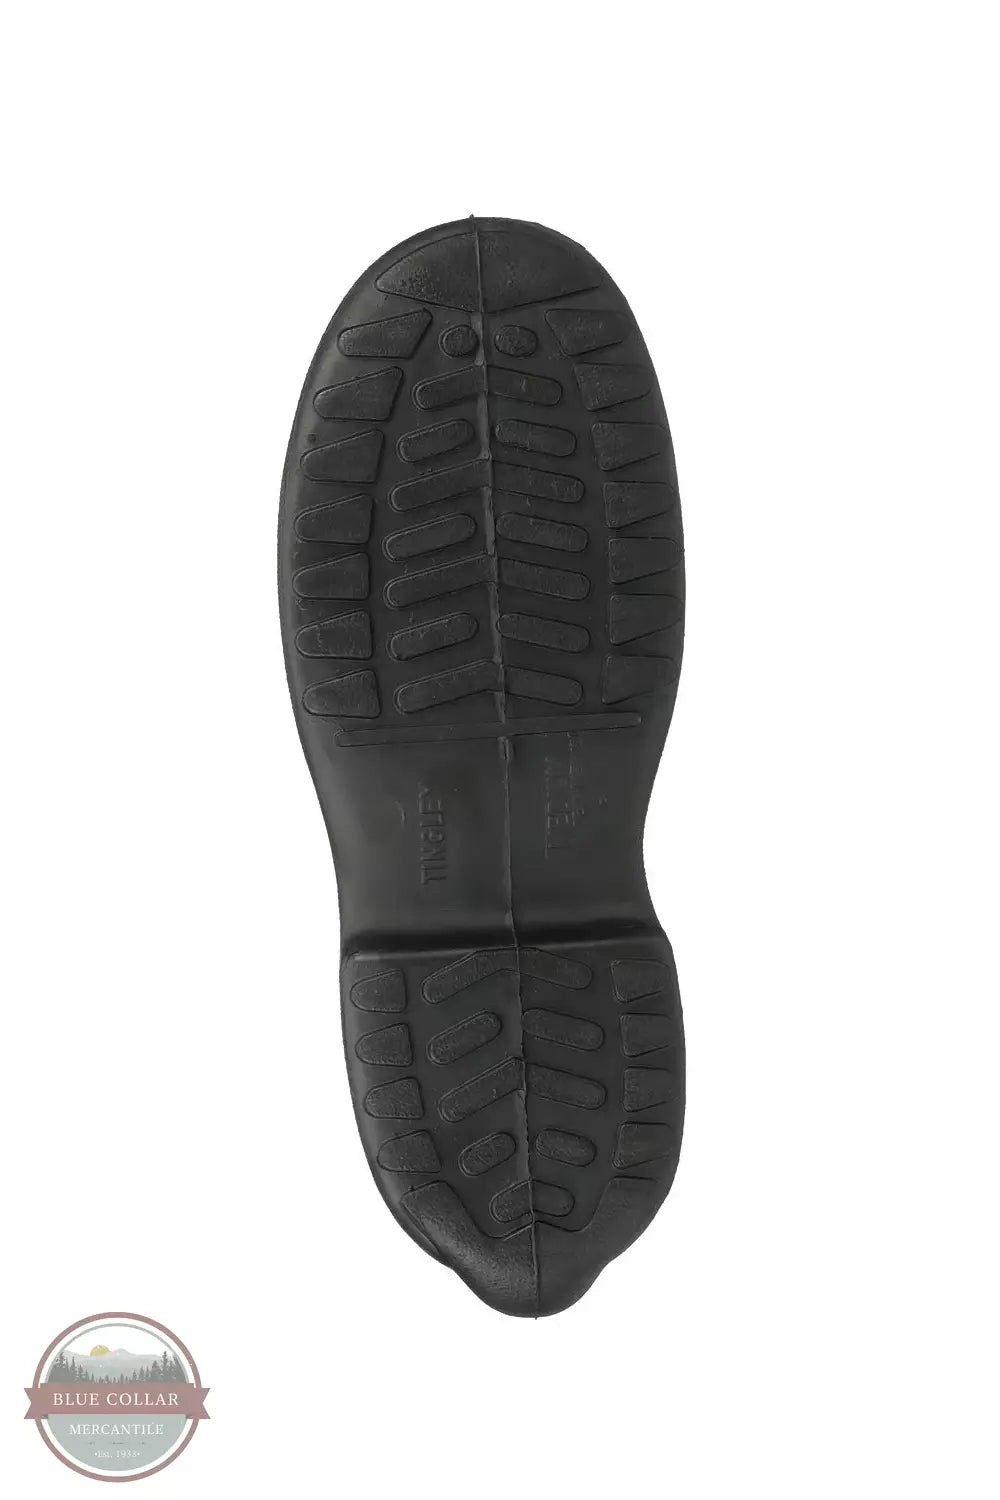 Tingley 1400 10 Inch Closure Boot Sole View